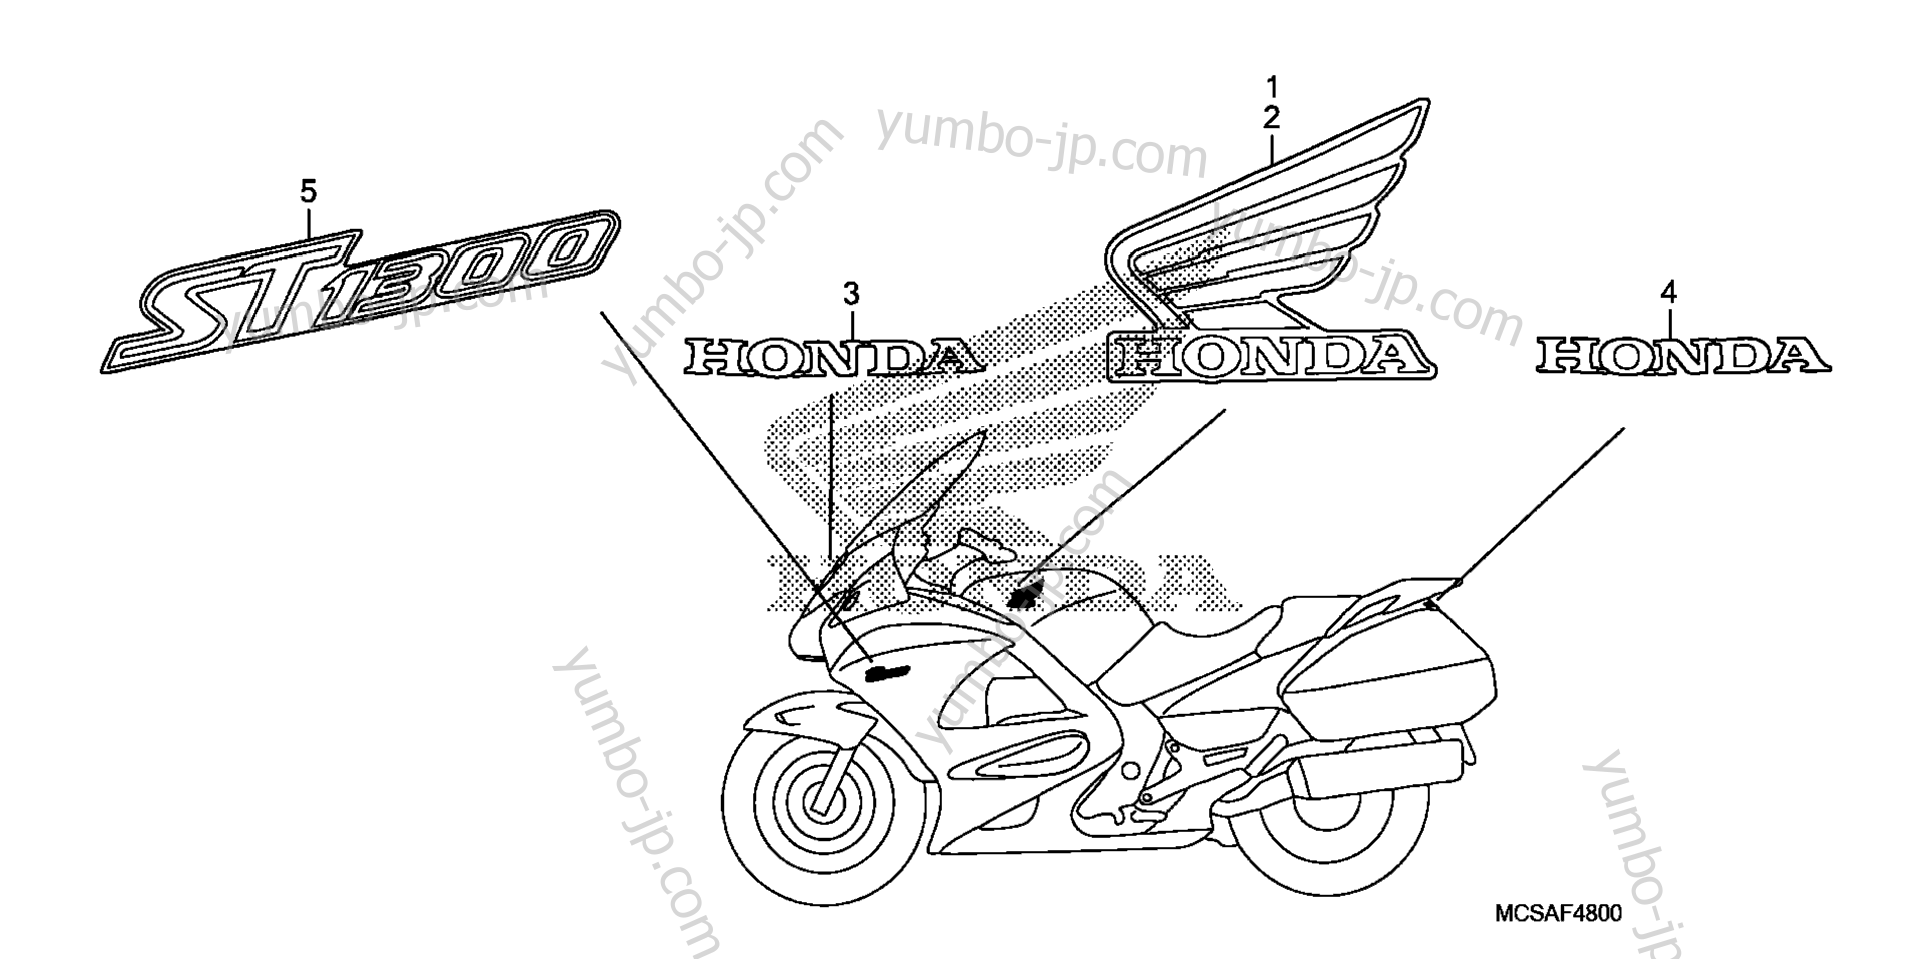 MARKS for motorcycles HONDA ST1300A A 2009 year